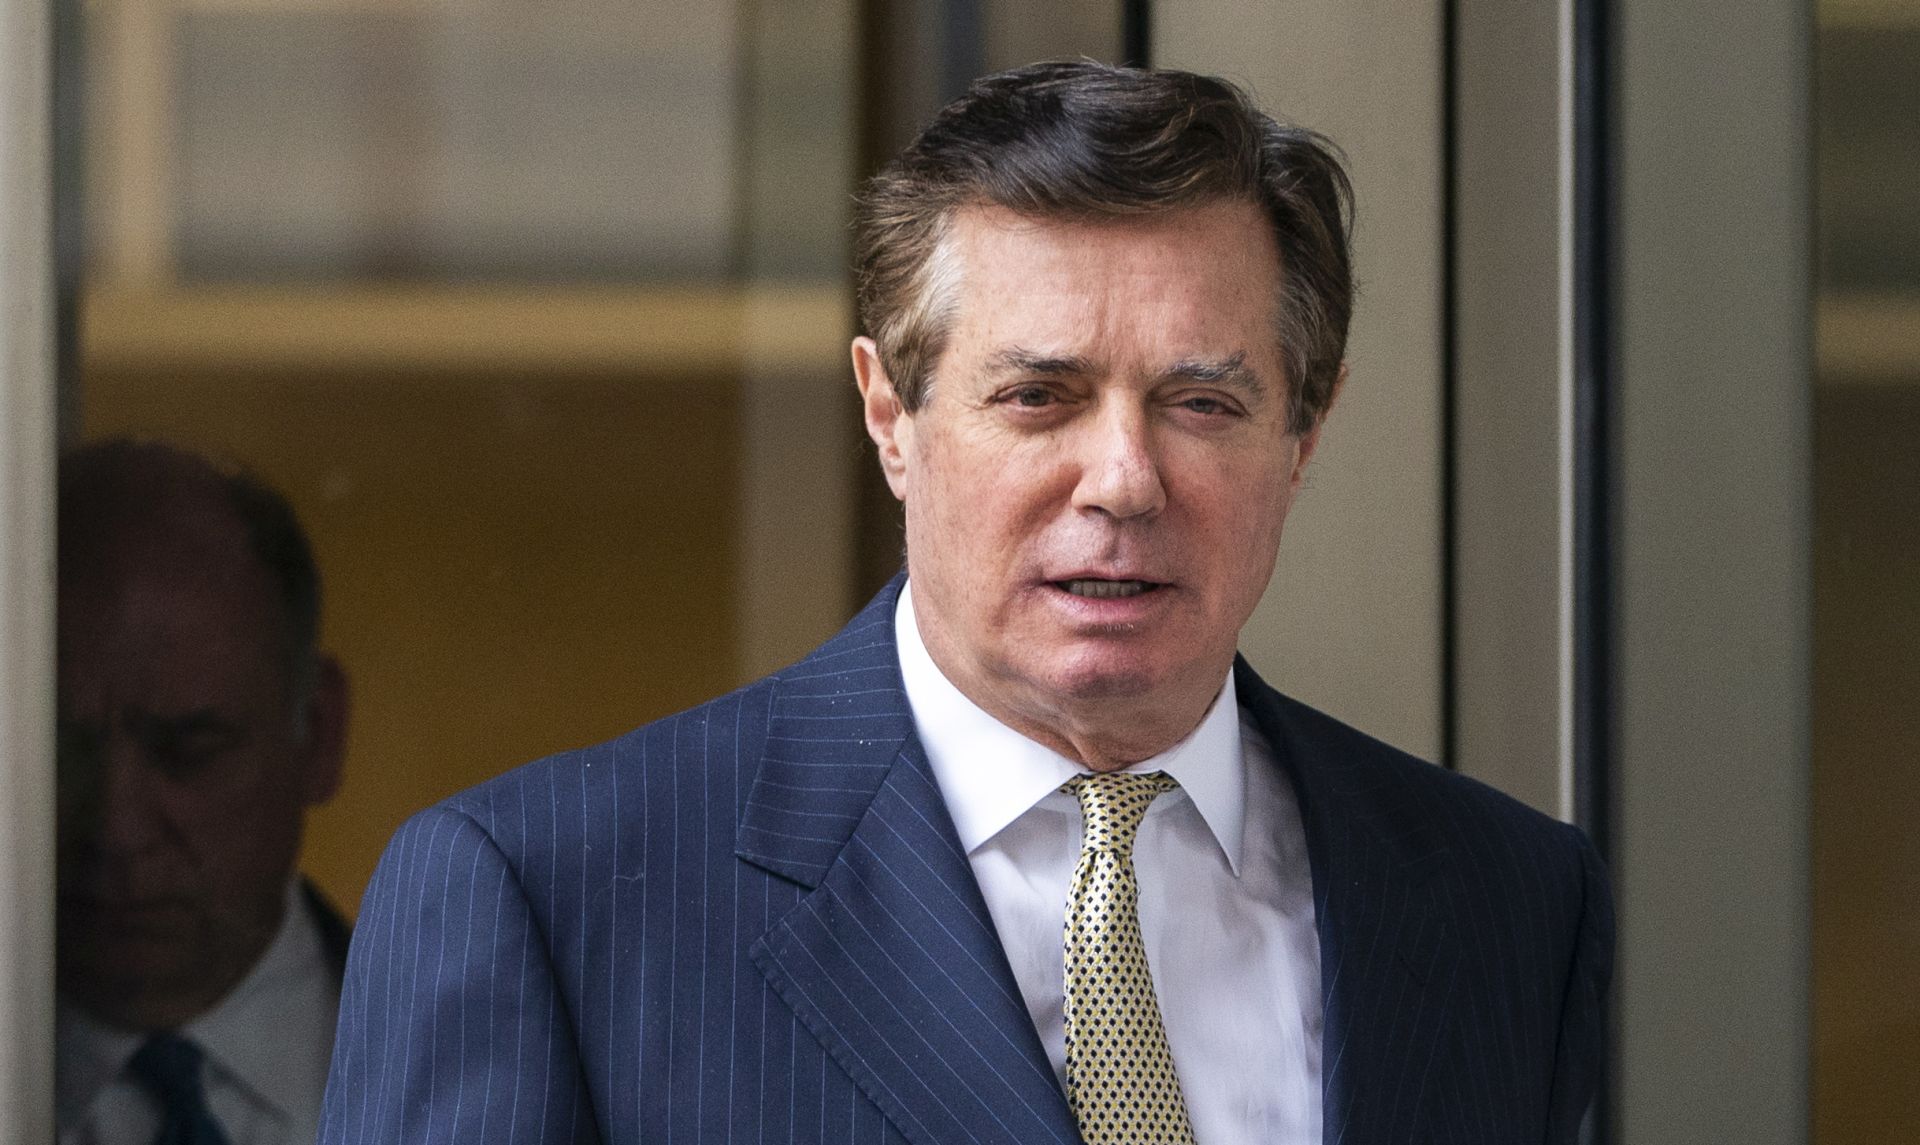 epa06963989 (FILE) - Paul Manafort, former campaign manager for US President Donald J. Trump, leaves the DC federal courthouse after asking the court to dismiss charges brought by special counsel Robert Mueller in Washington, DC, USA, 19 April 2018 (reissued 22 August 2018). Manafort, who was facing 18 charges including tax evasion and bank fraud was found guilty 21 August 2018 at US District Court in Alexandria, Virginia, USA after fourth day of jury deliberations on 8 charges while the judge declared a mistrial on 10 other charges.  EPA/JIM LO SCALZO